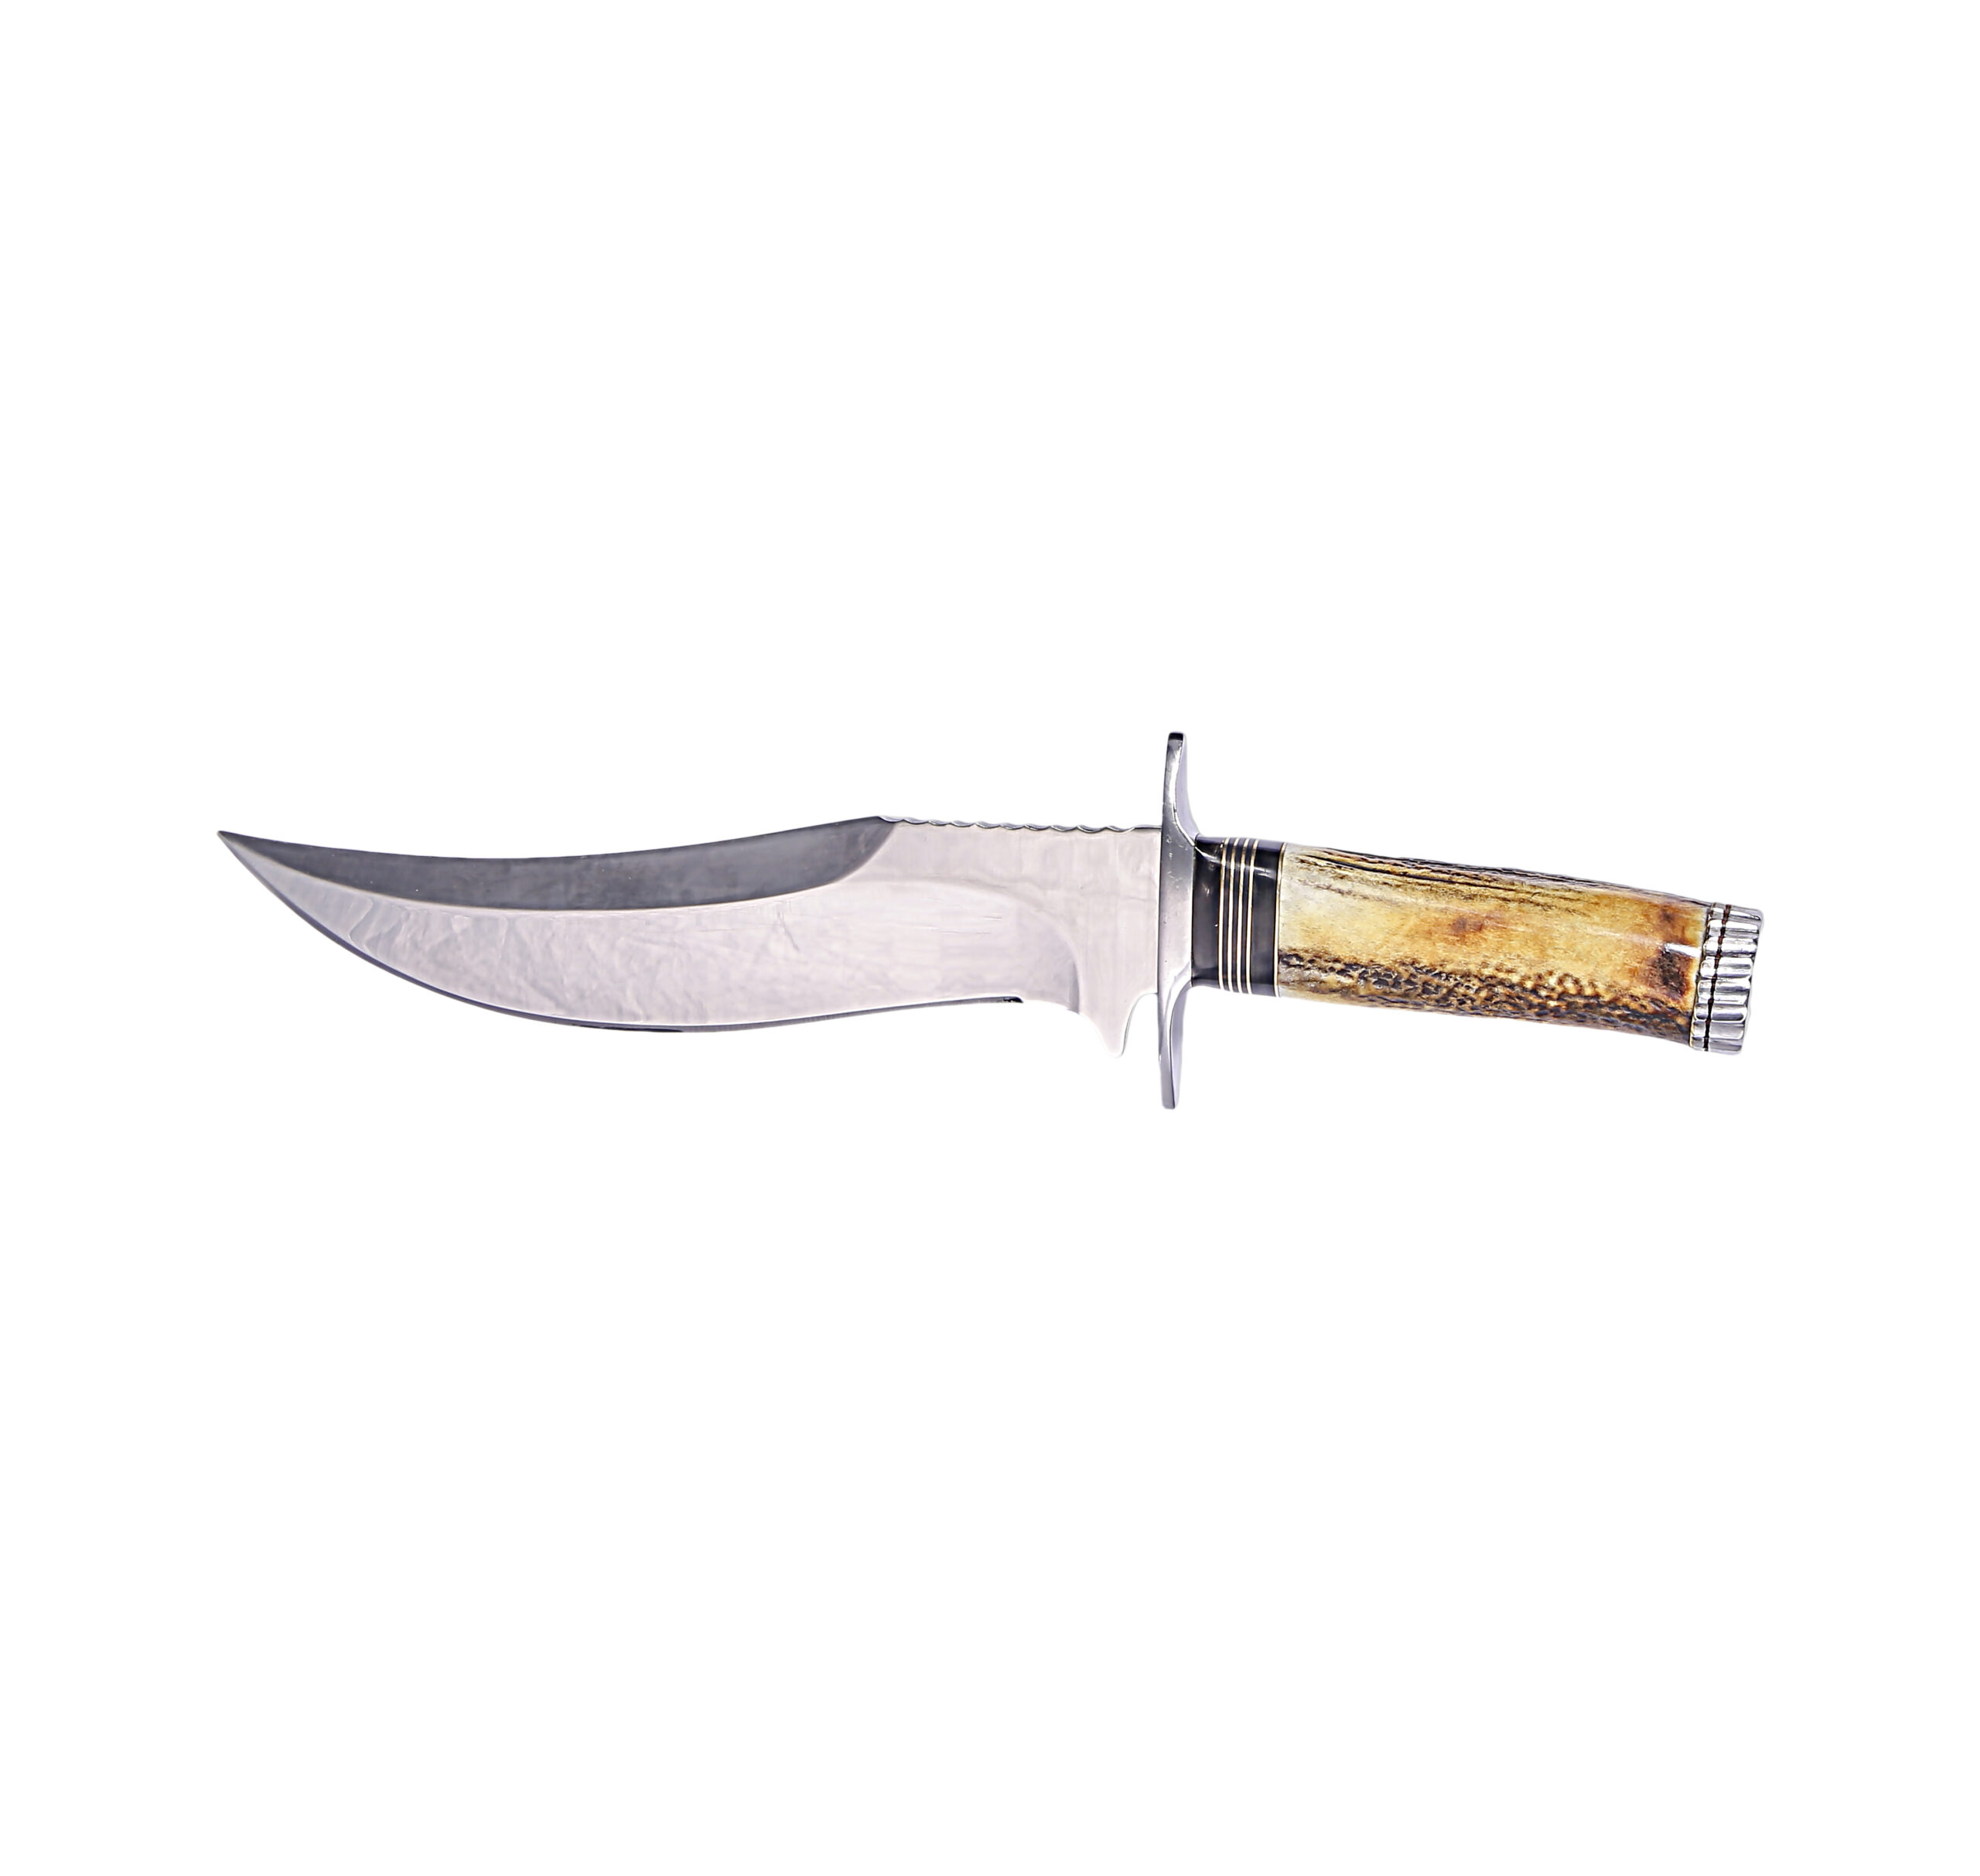 CSTM HDMD Bowie Hunting Knife – Tailor Knives